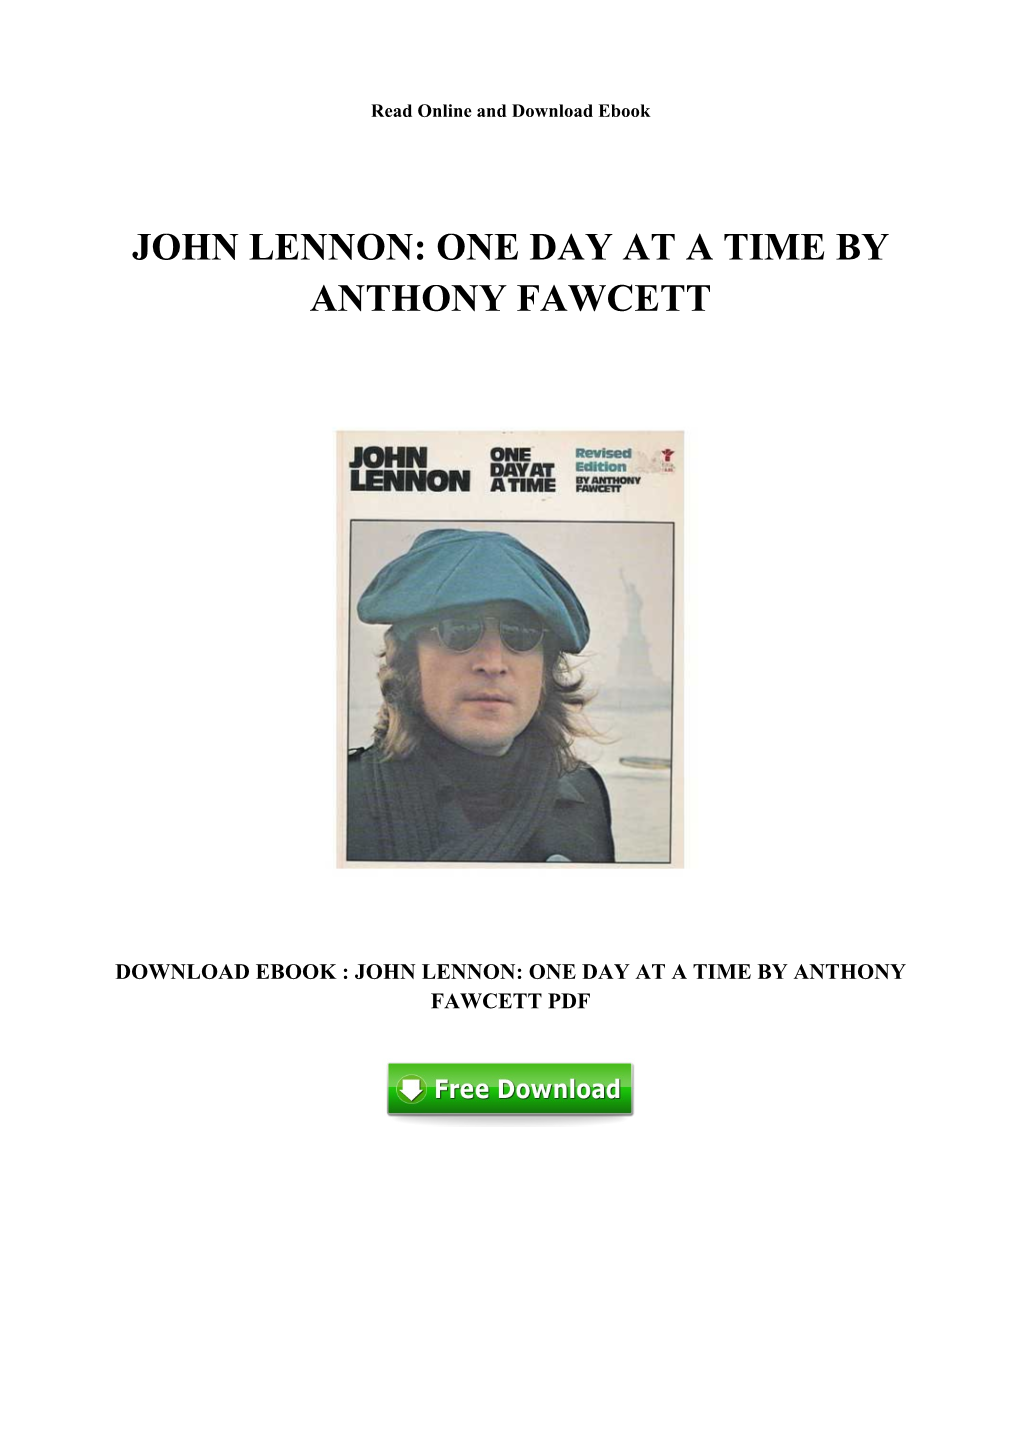 Free PDF John Lennon: One Day at a Time by Anthony Fawcett